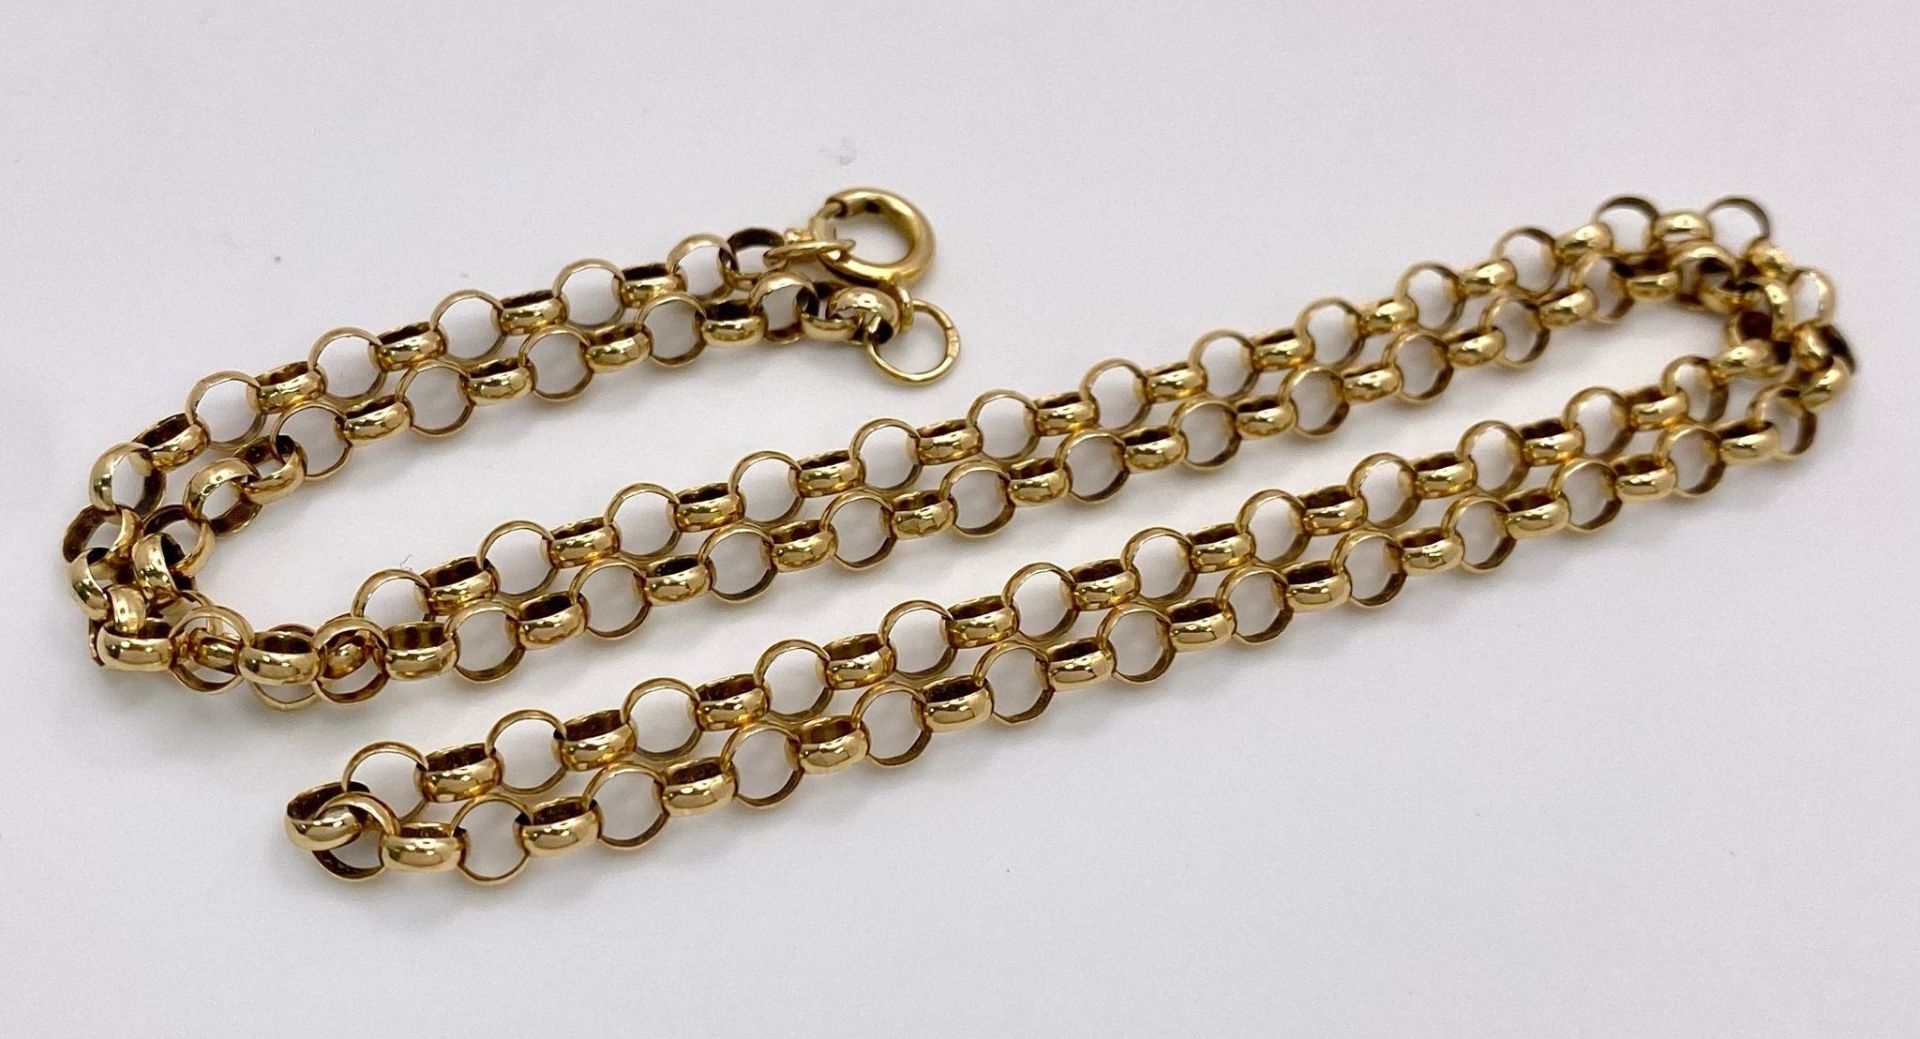 A 14K Yellow Gold Belcher Link Necklace. 52cm length. 11.66g weight. - Image 4 of 5